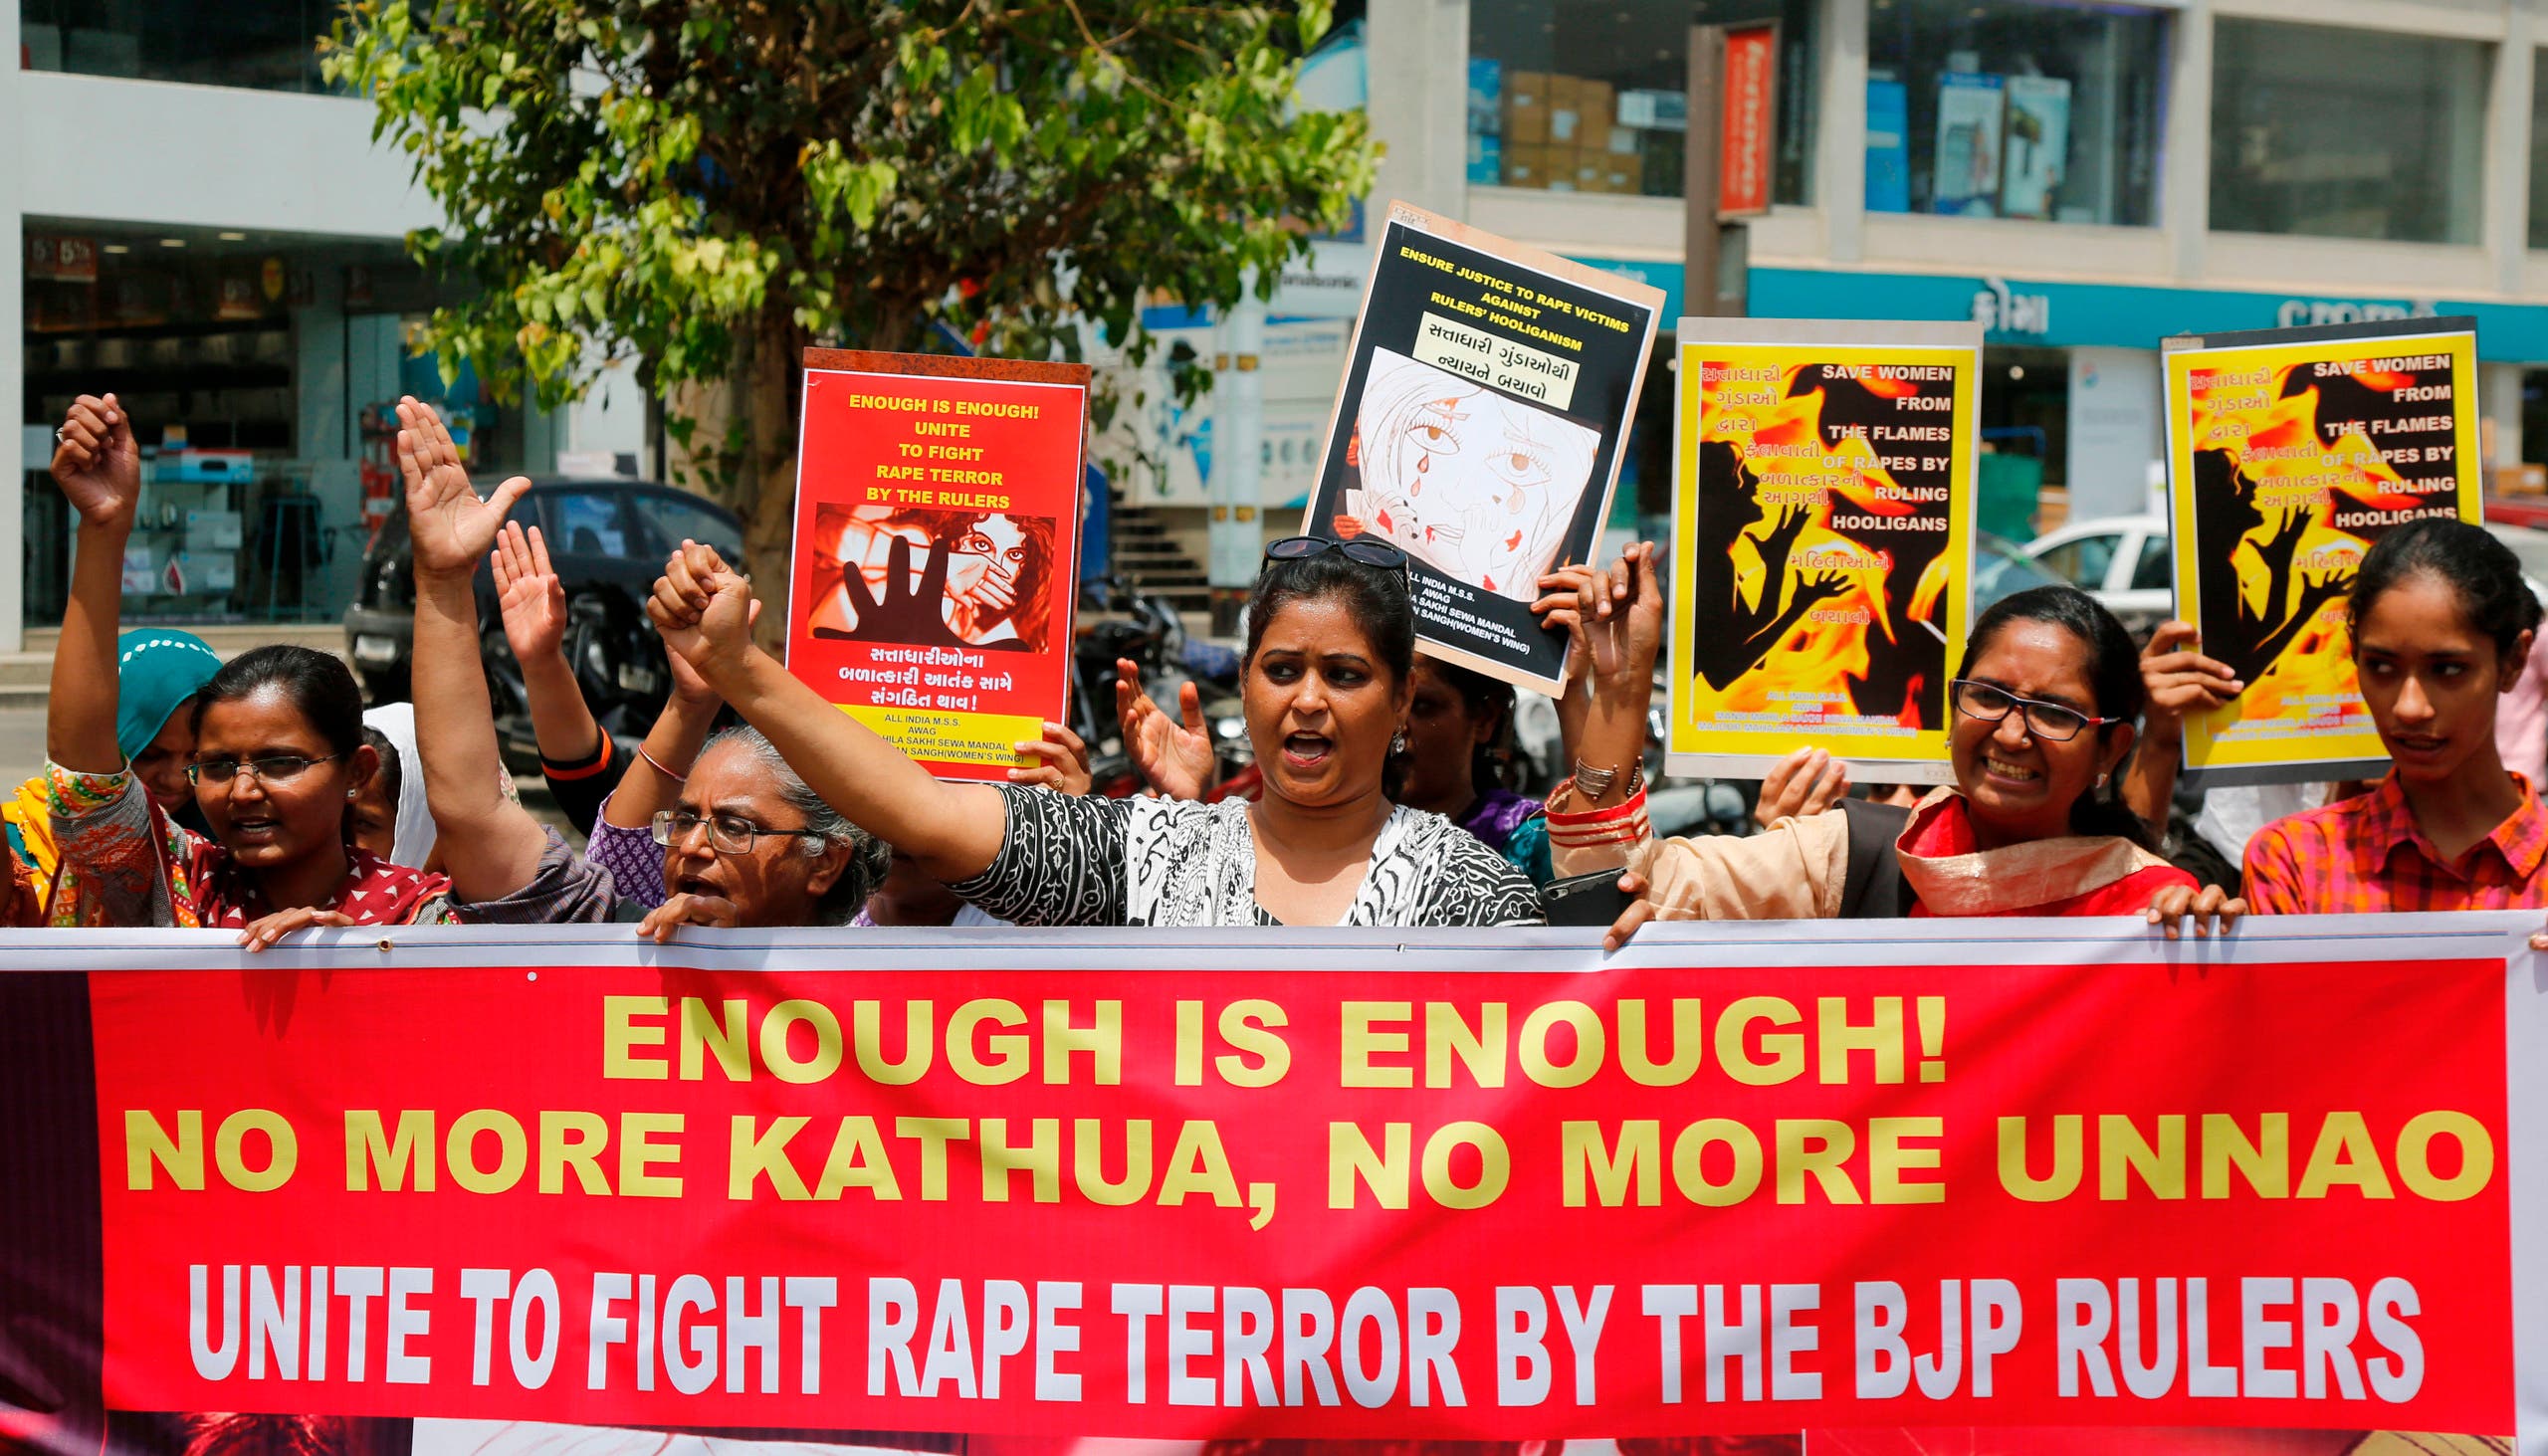 Indian women shout slogans during a protest against recent incidents of rape, in Ahmadabad, India, Friday, April 13, 2018. In 2012, the fatal gang rape of a young woman in the heart of India's capital moved Indians to take to the streets to demand stricter rape laws. But the gang rape and killing of a Muslim girl in Kathua has seen far different protests: members of a radical Hindu group have marched to demand the release of the six men accused of repeatedly raping the girl inside a Hindu temple. (AP Photo/Ajit Solanki)